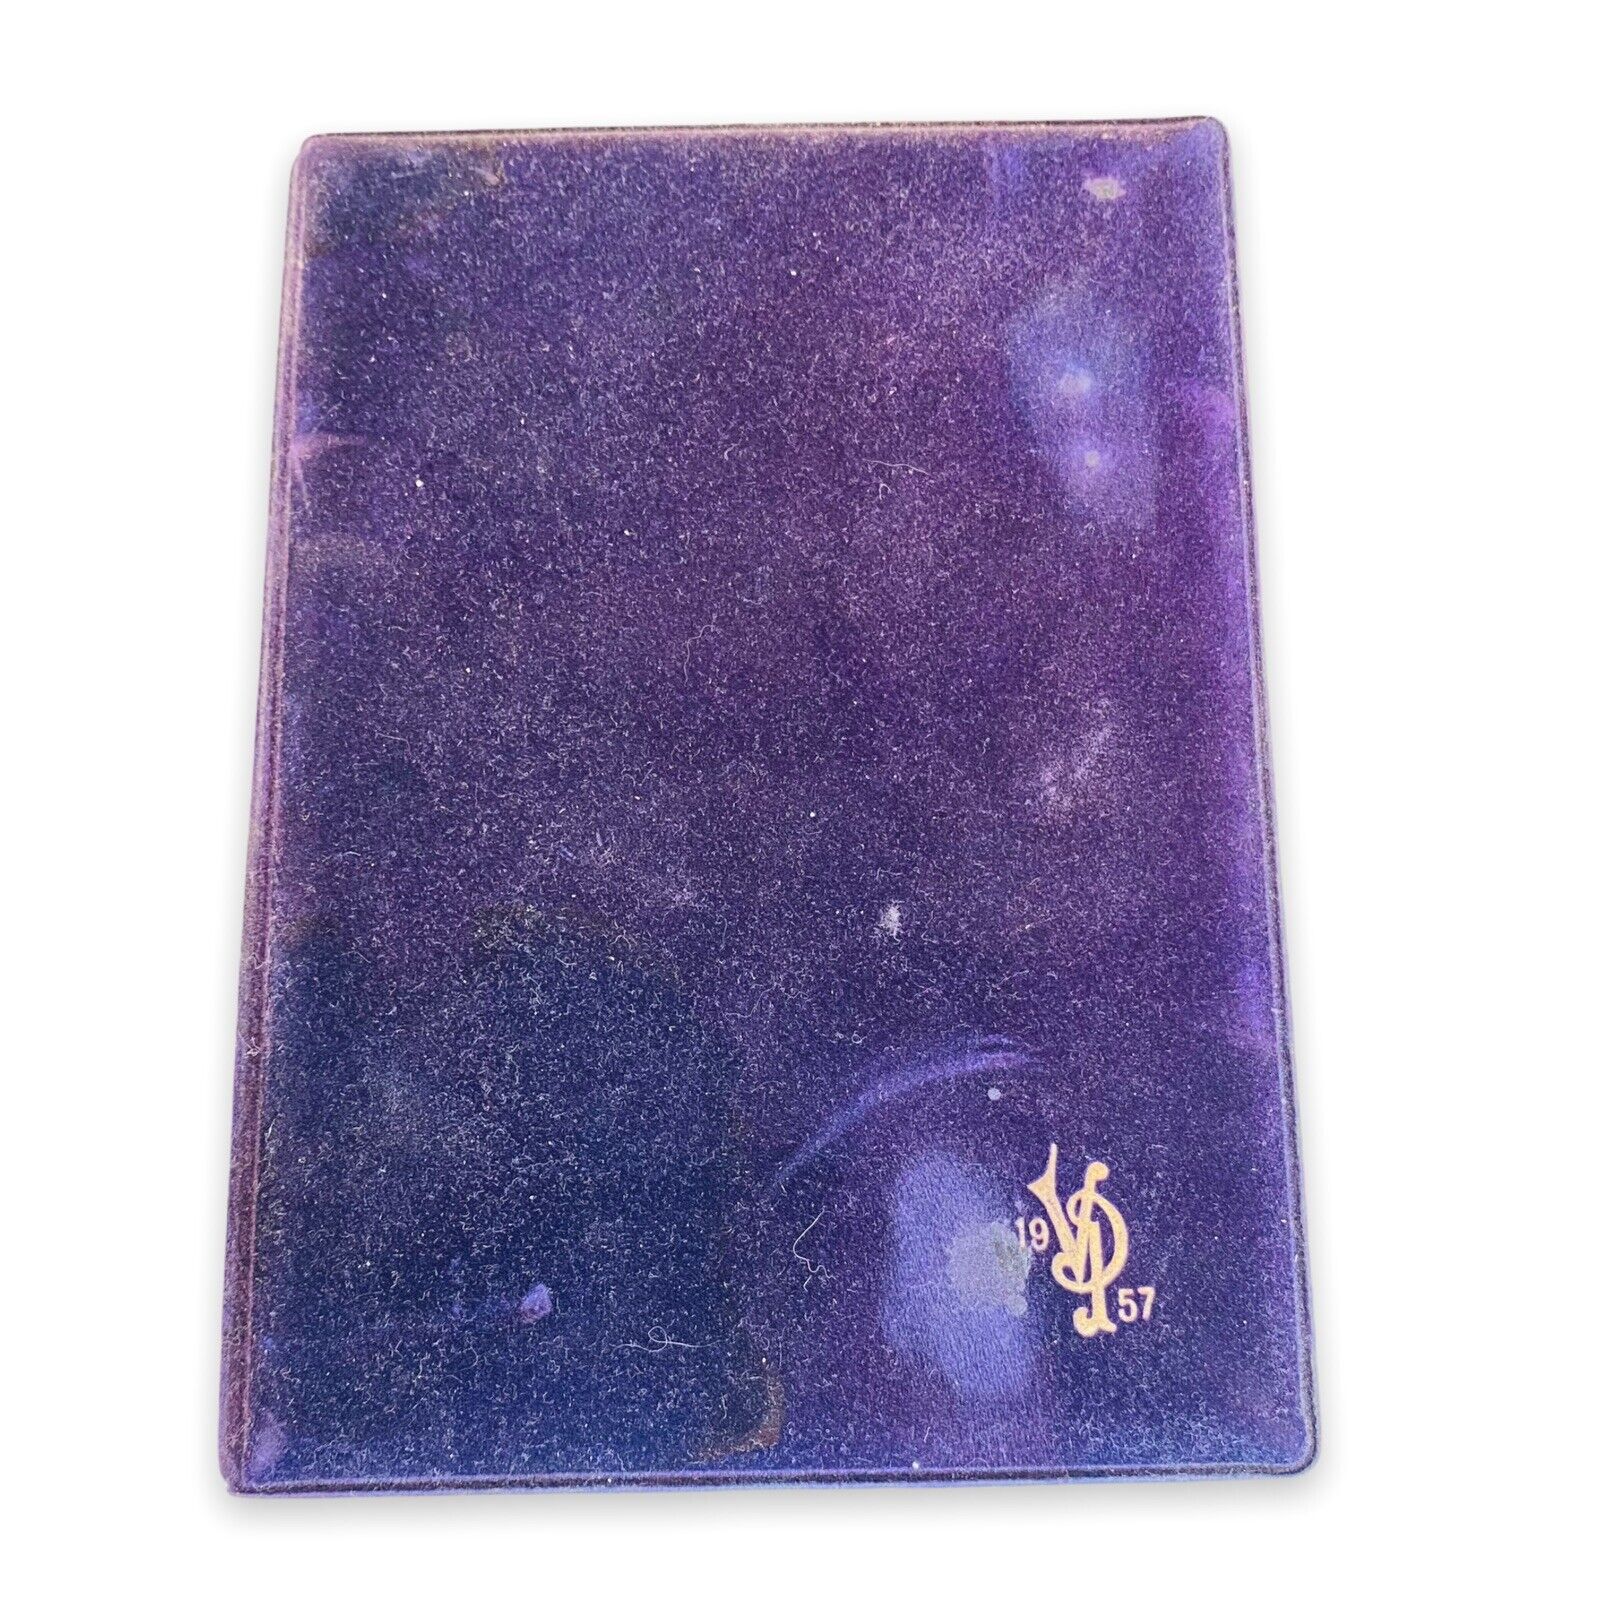 Vintage Veiled Prophet 1957 Notebook with Purple Cover with Christmas List?